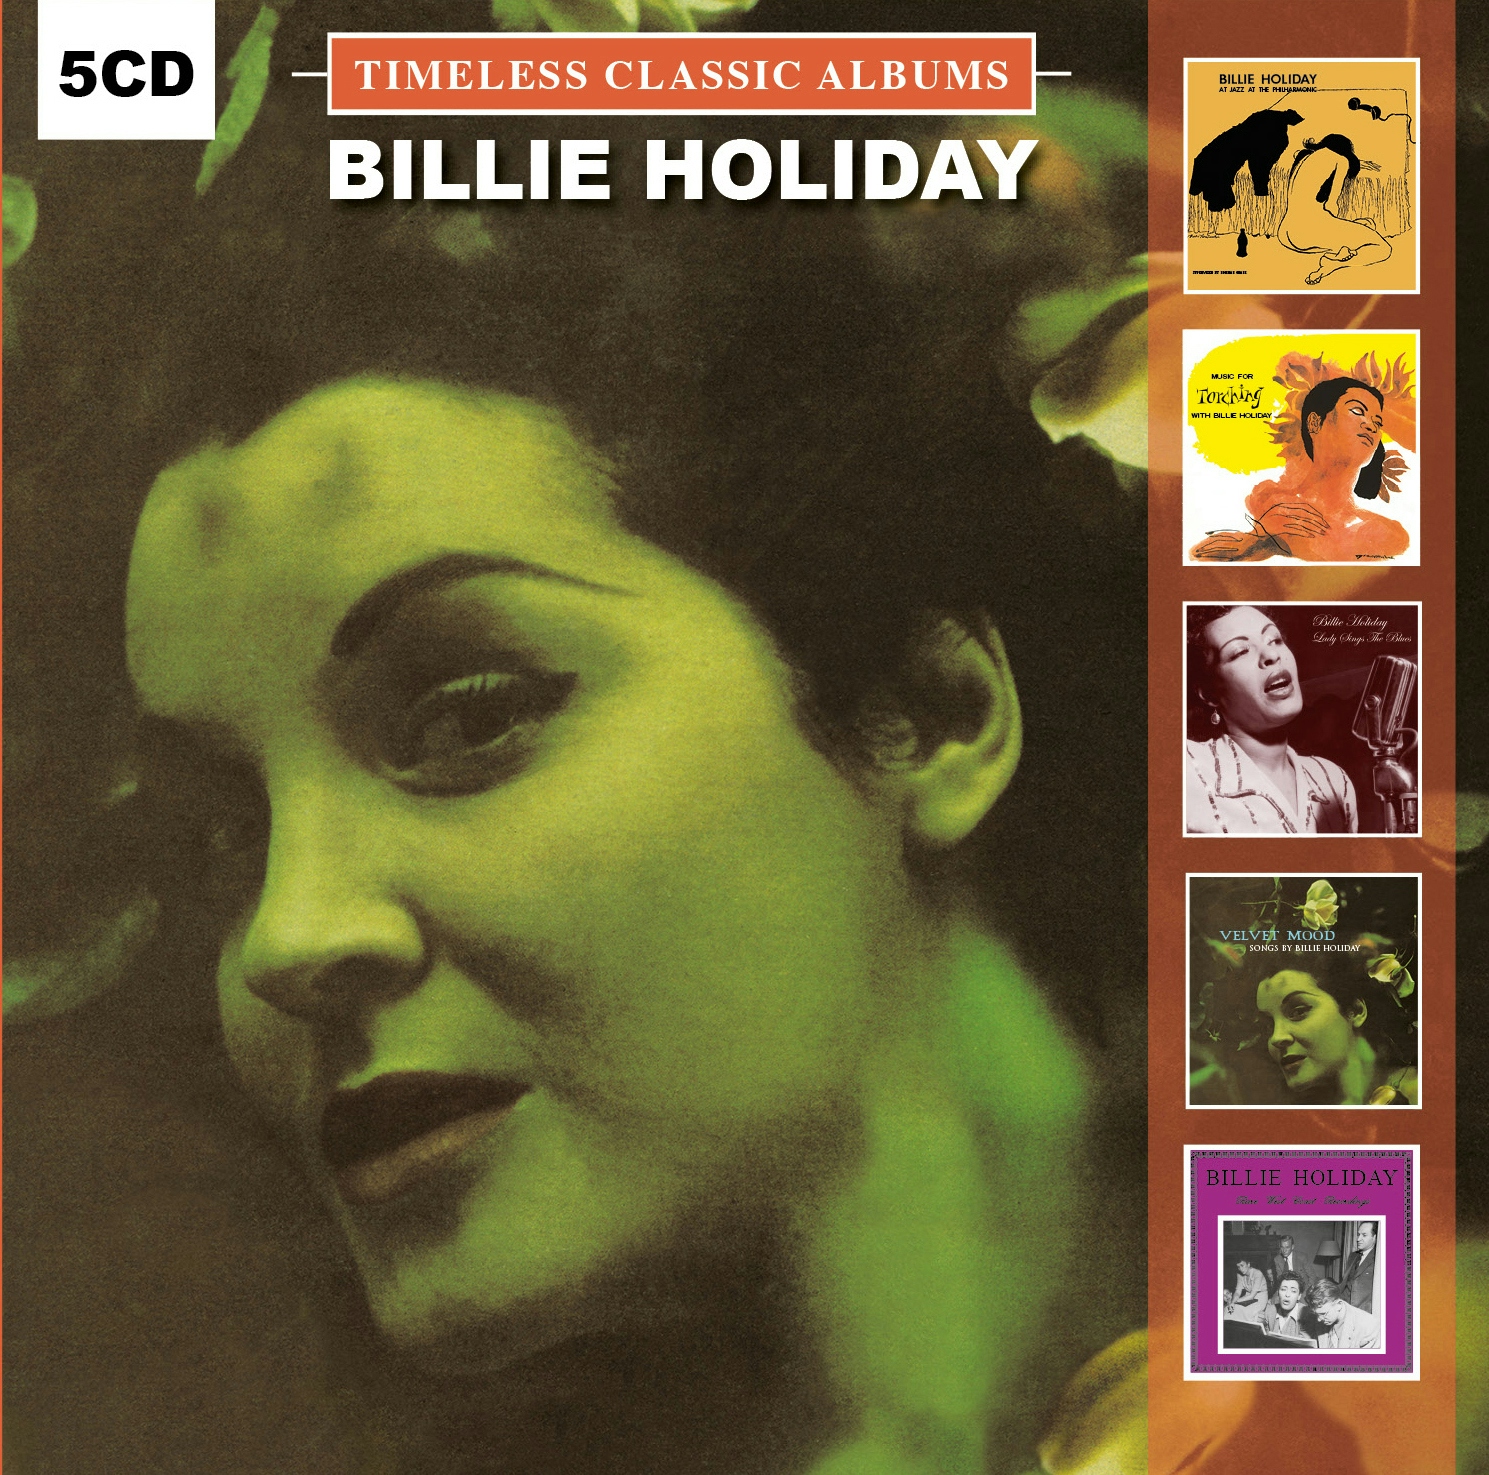 Album artwork for Album artwork for Timeless Classic Albums by Billie Holiday by Timeless Classic Albums - Billie Holiday